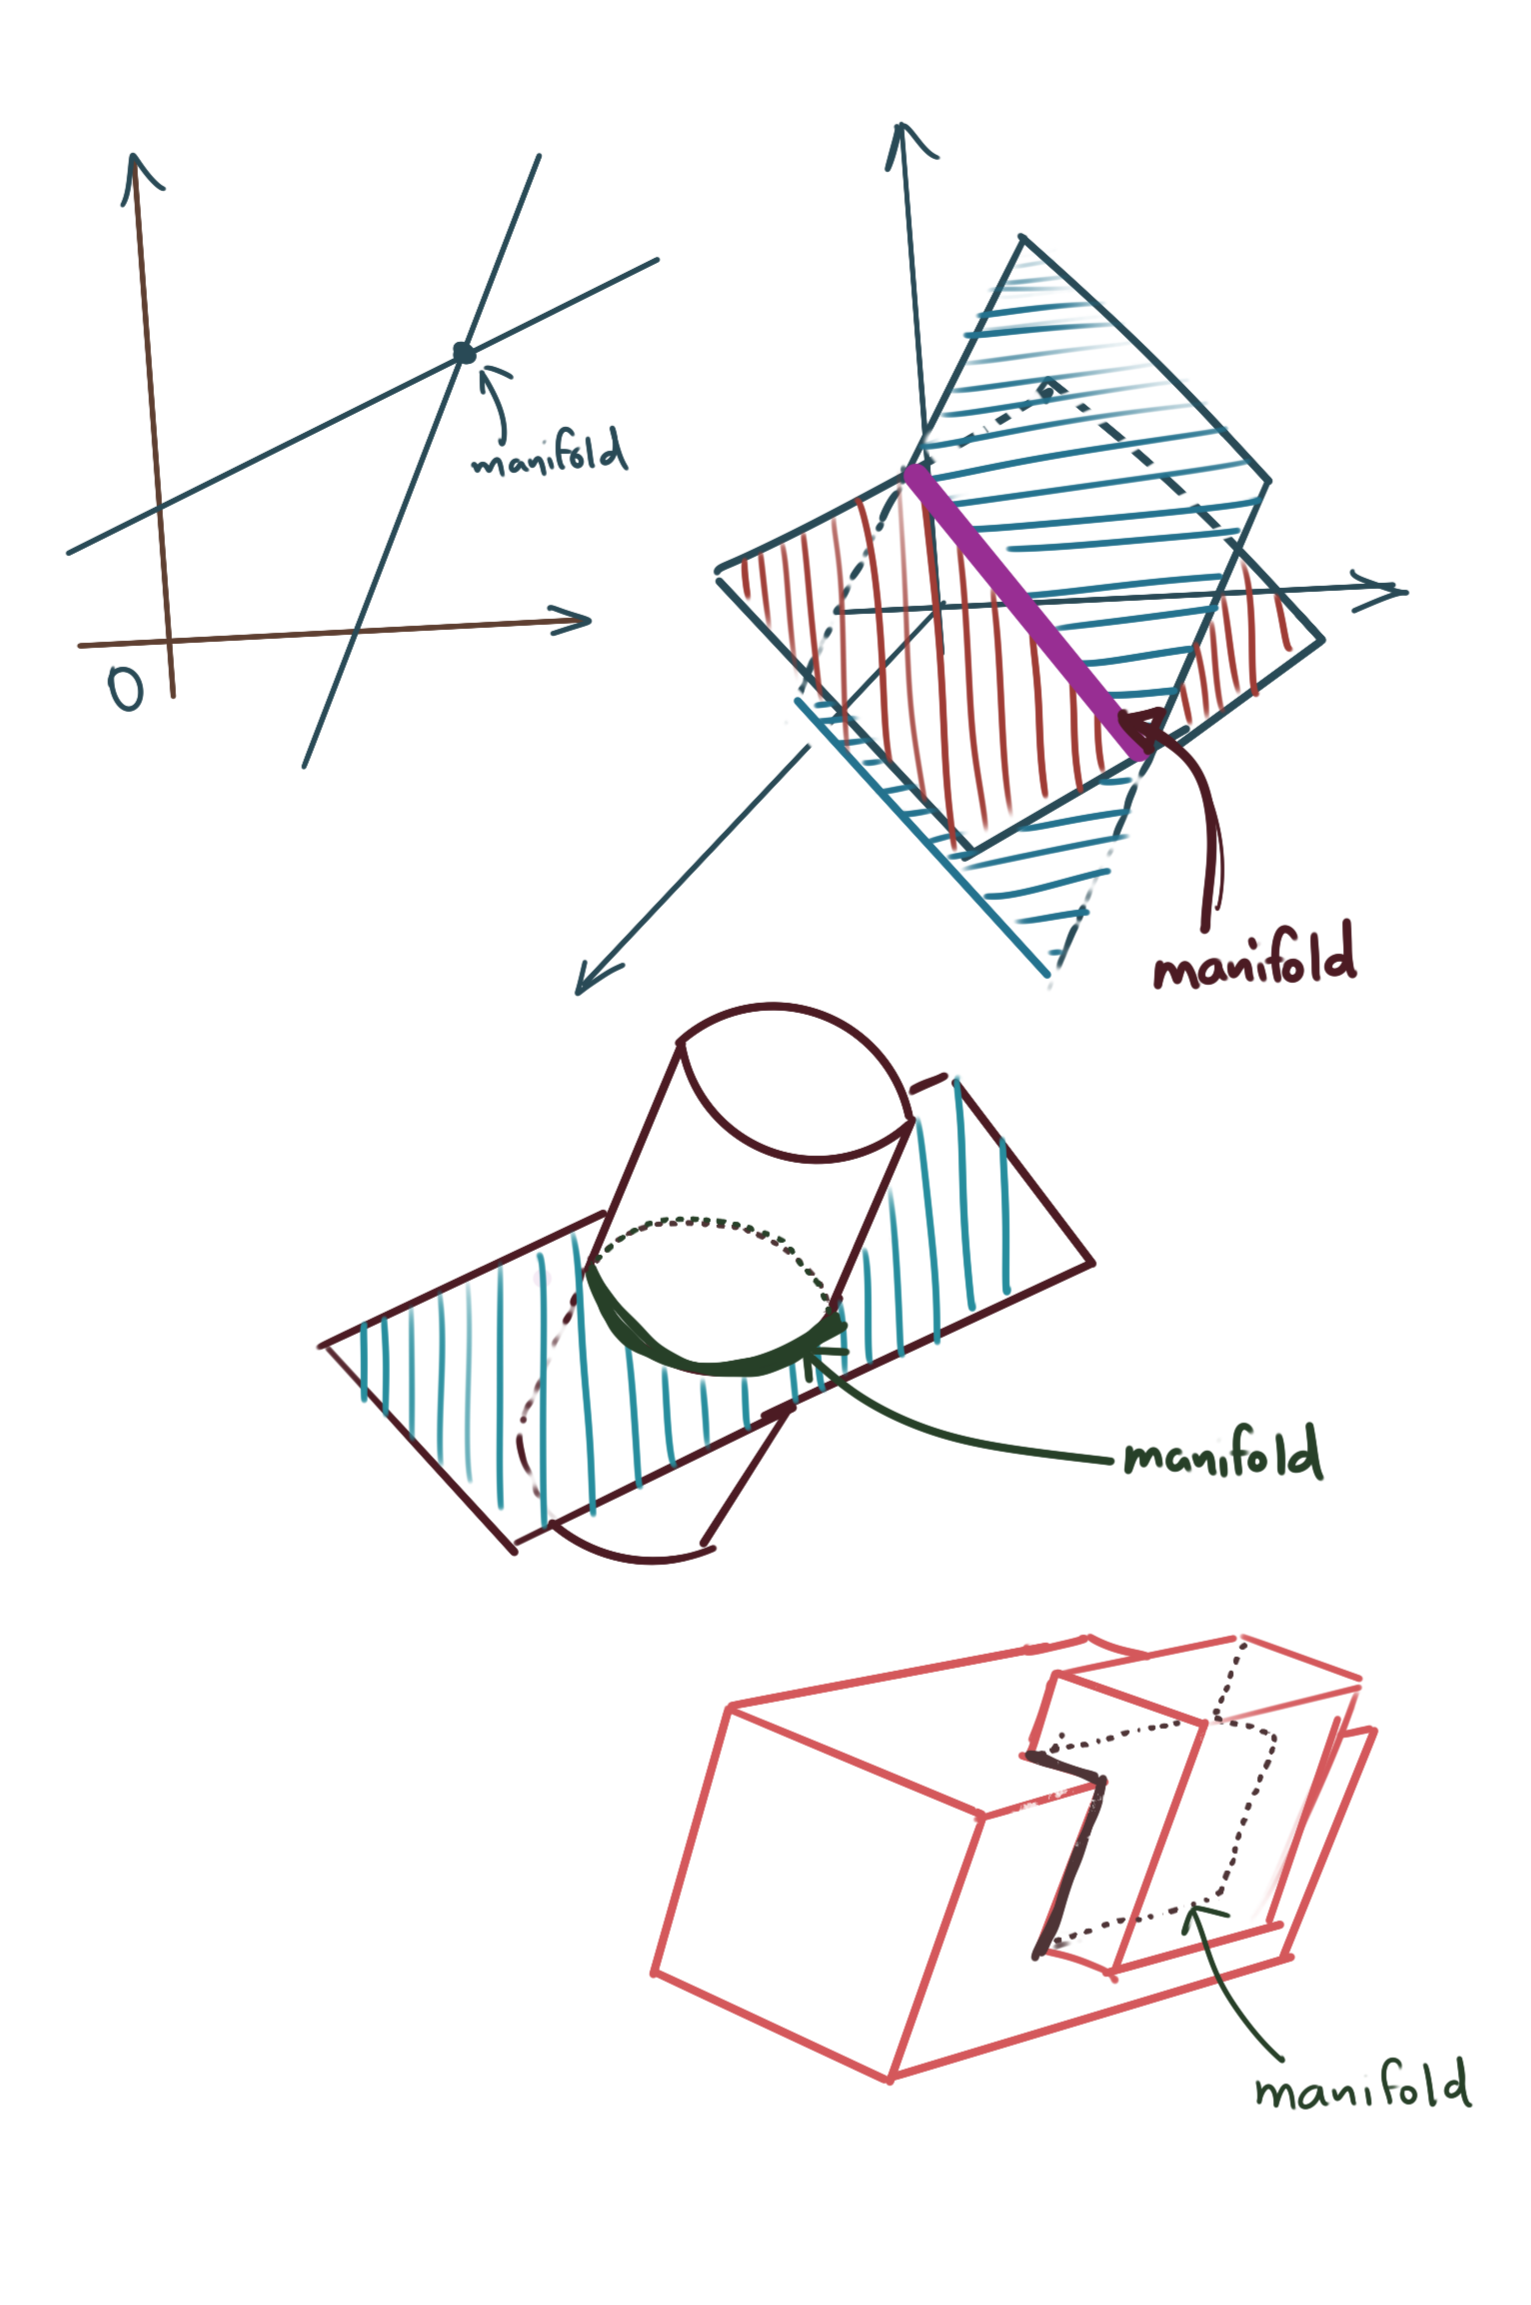 Examples of Manifolds